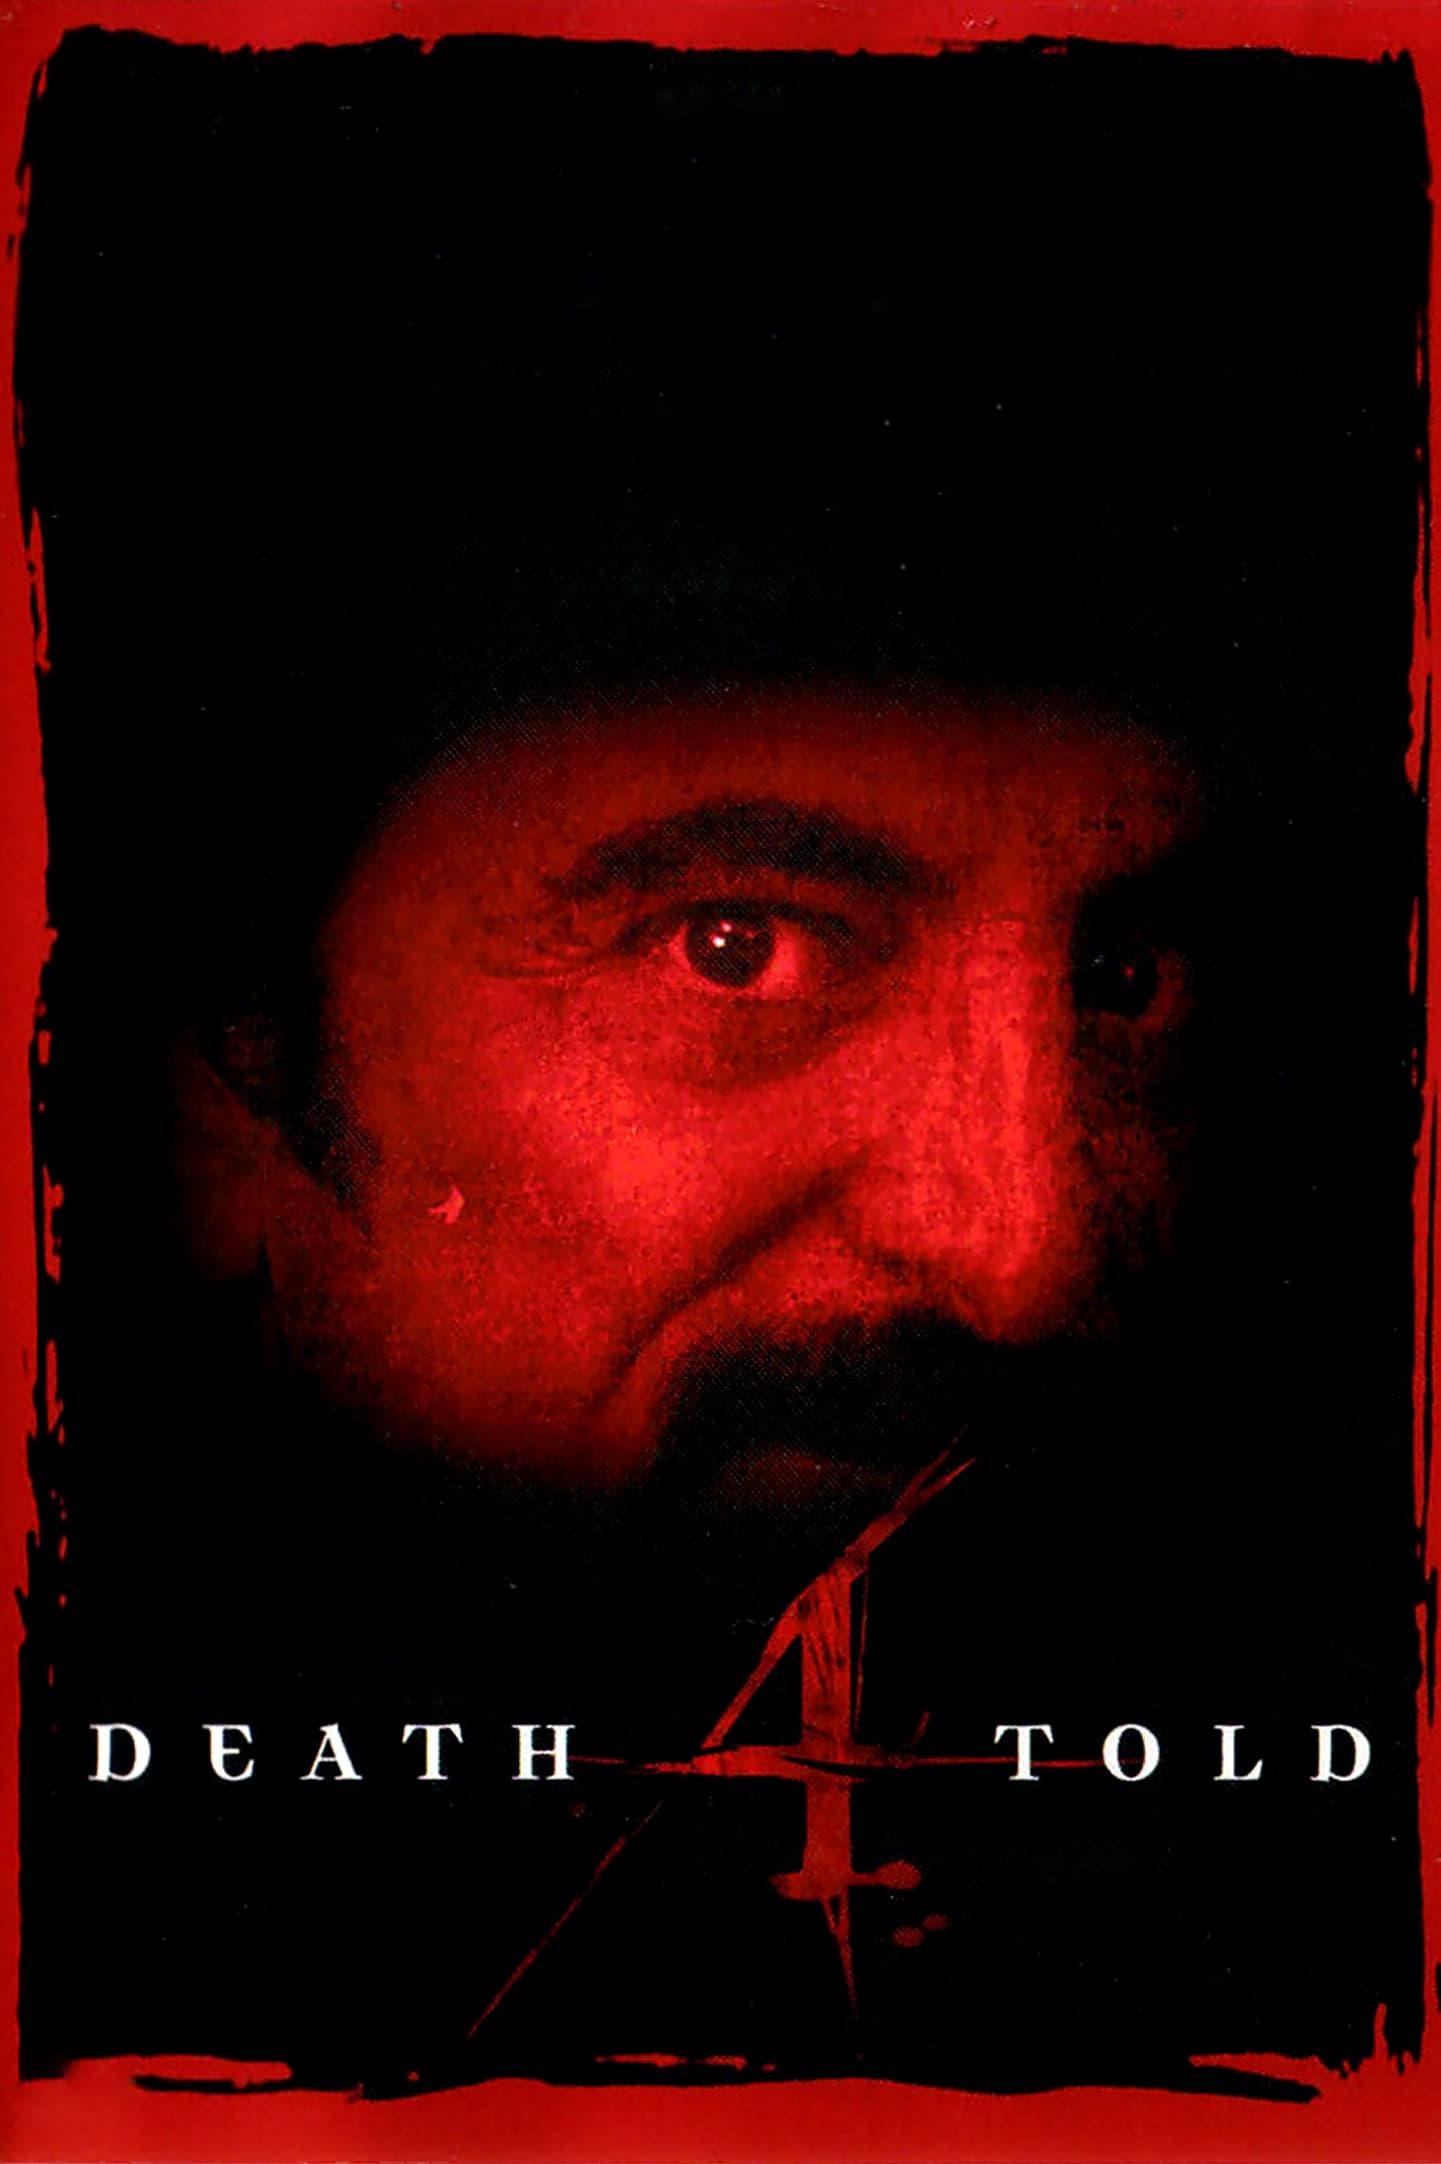 Death 4 Told poster